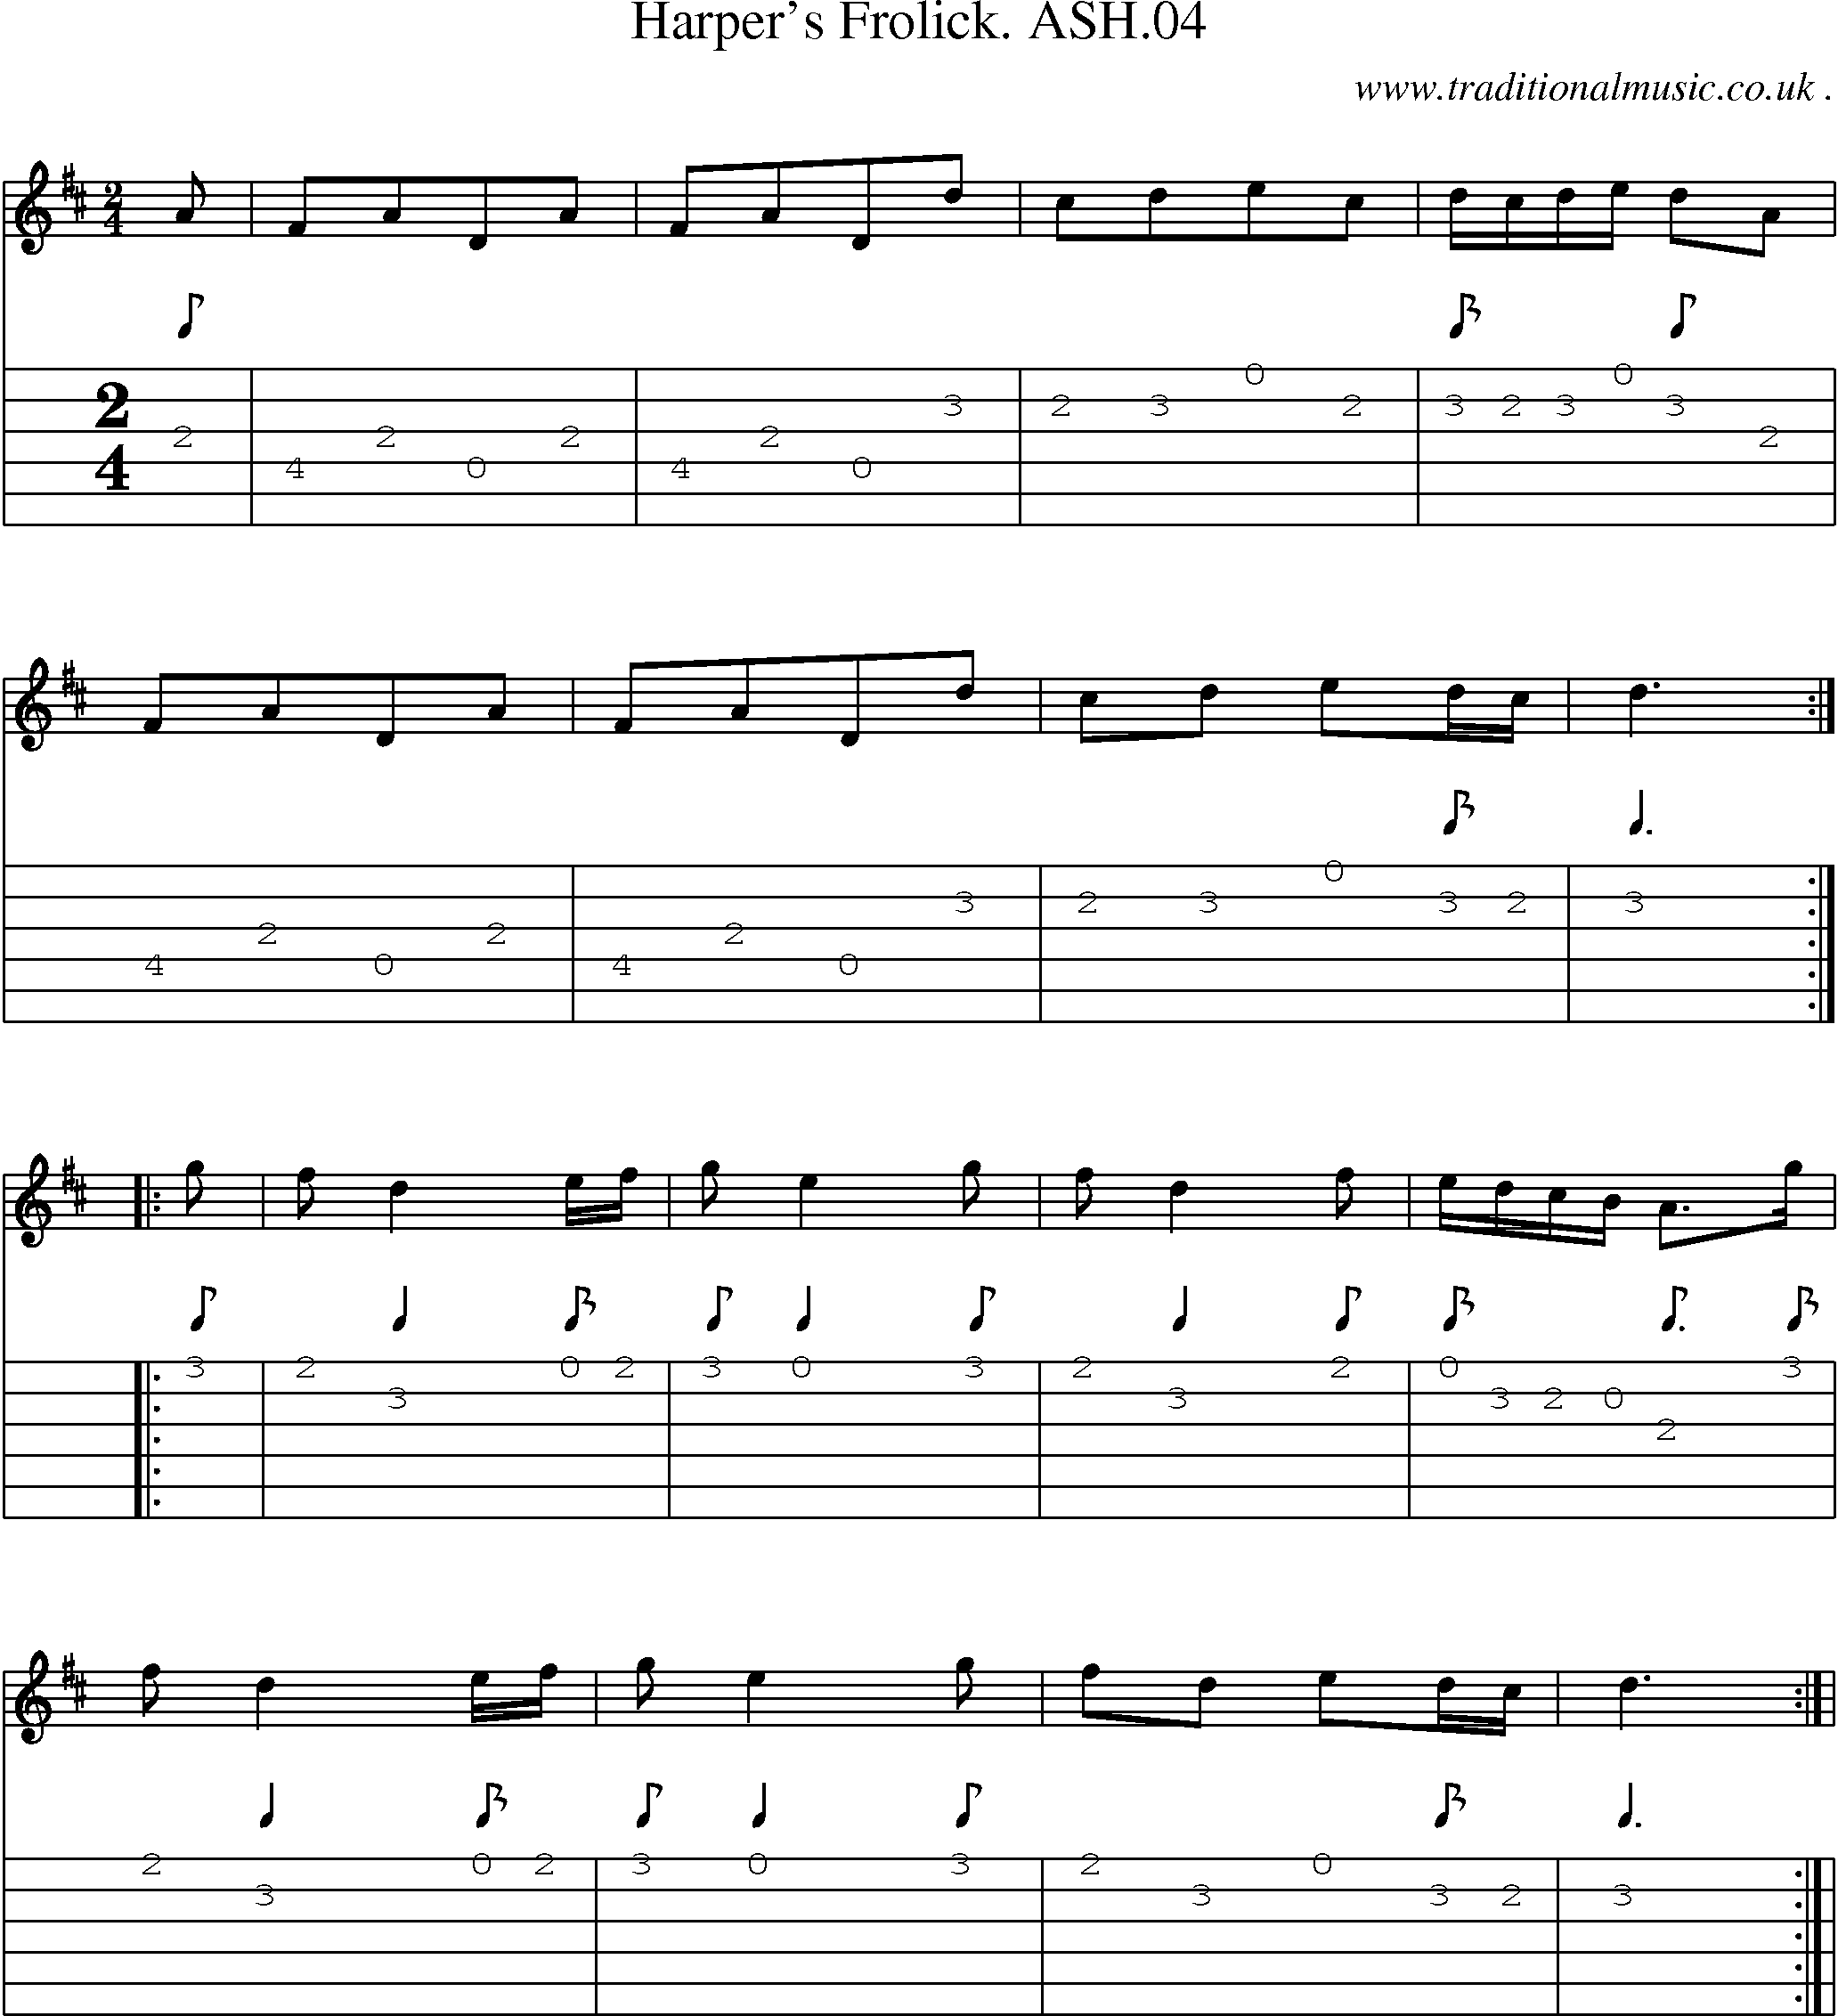 Sheet-Music and Guitar Tabs for Harpers Frolick Ash04